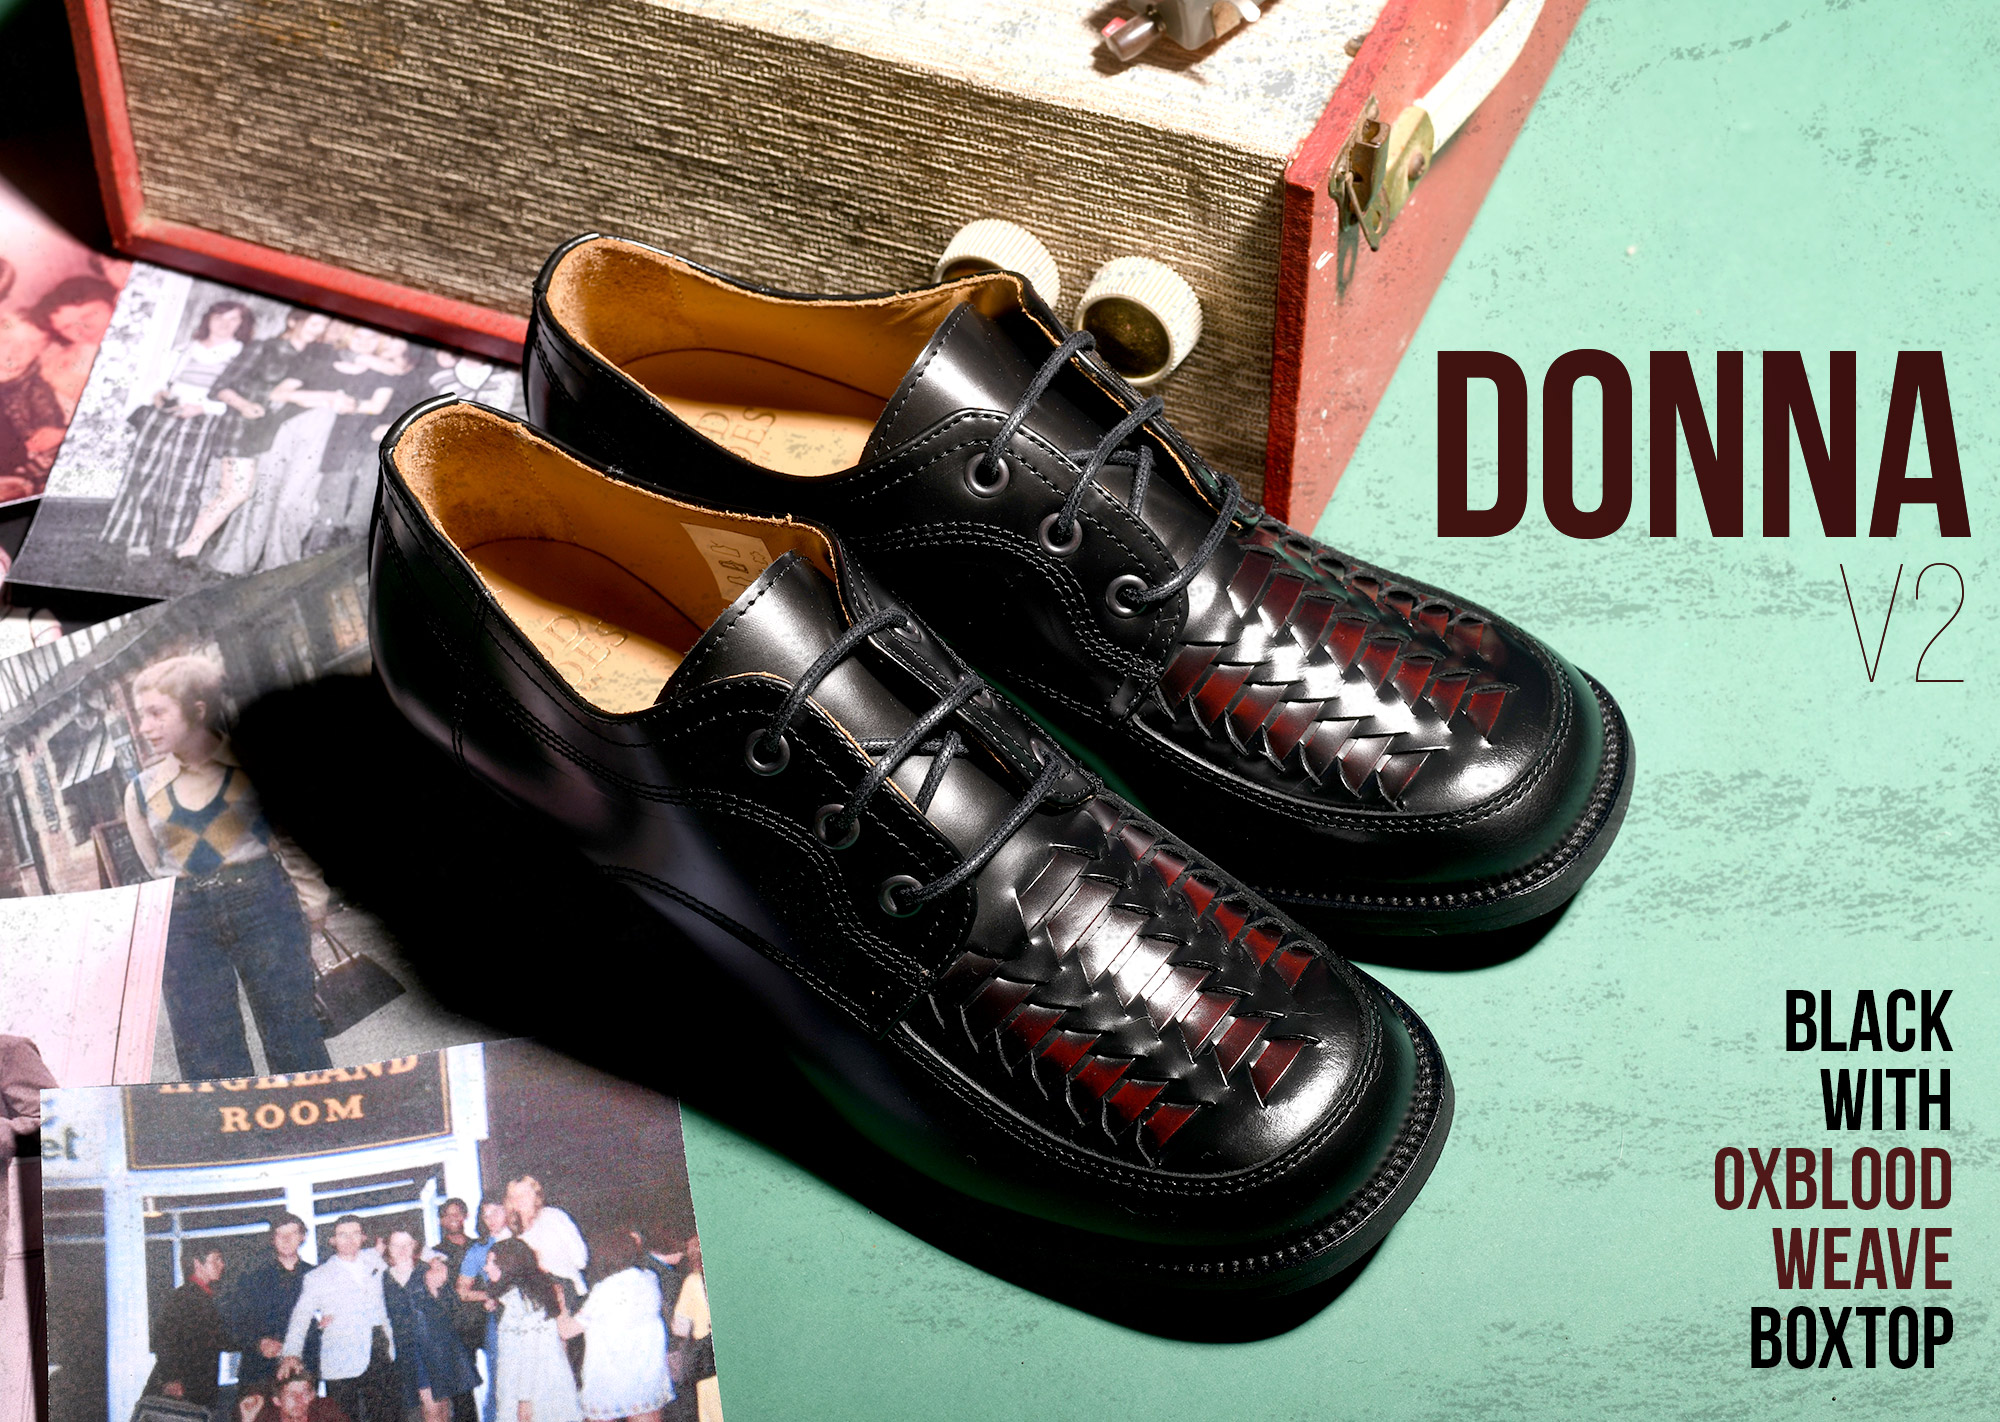 modshoes-the-donna-V2-box-tops-leather-in-black-with-oxblood-weave-nothern-soul-ska-skinhead-womens-shoes-01  – Mod Shoes